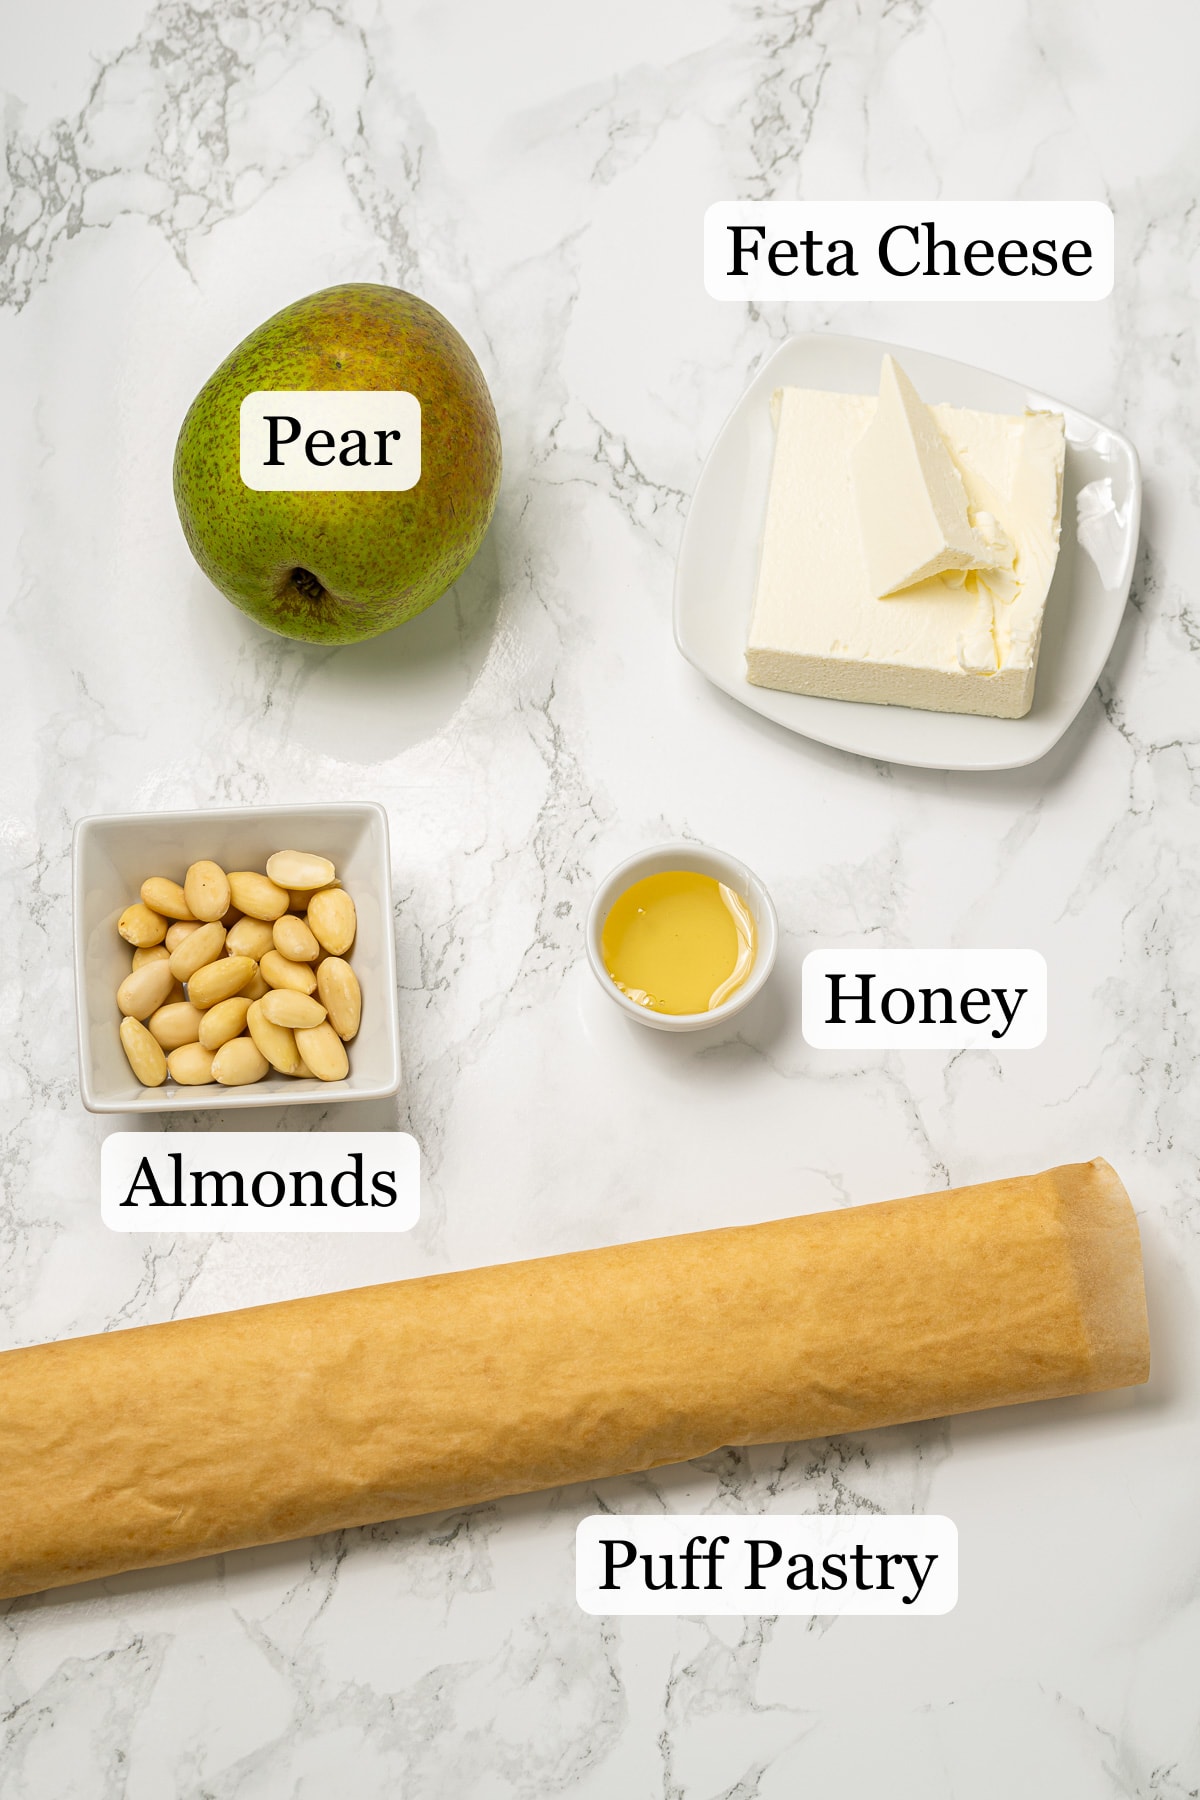 Ingredients for a pear and feta tart on a marble surface, including a whole pear, blocks of feta cheese, almonds, and a rolled dough.